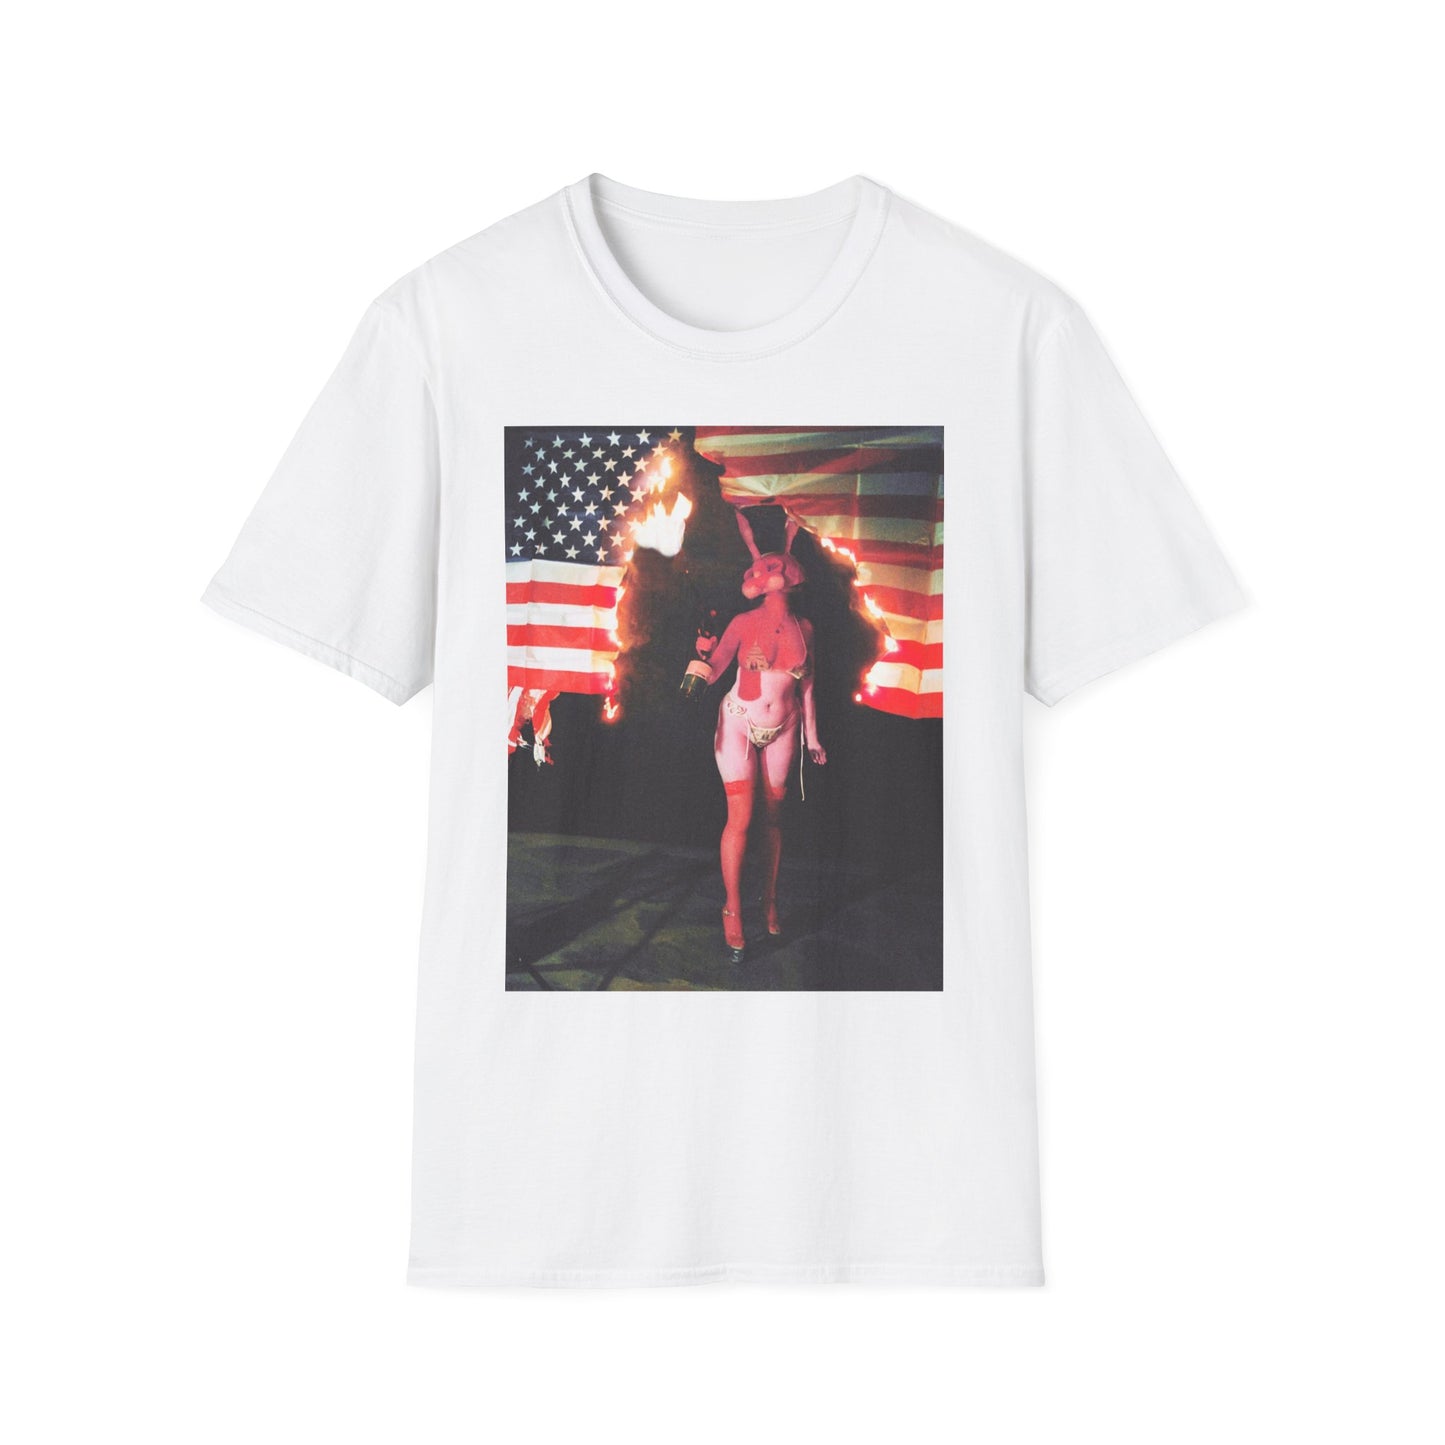 The Bunny Bless America T-Shirt